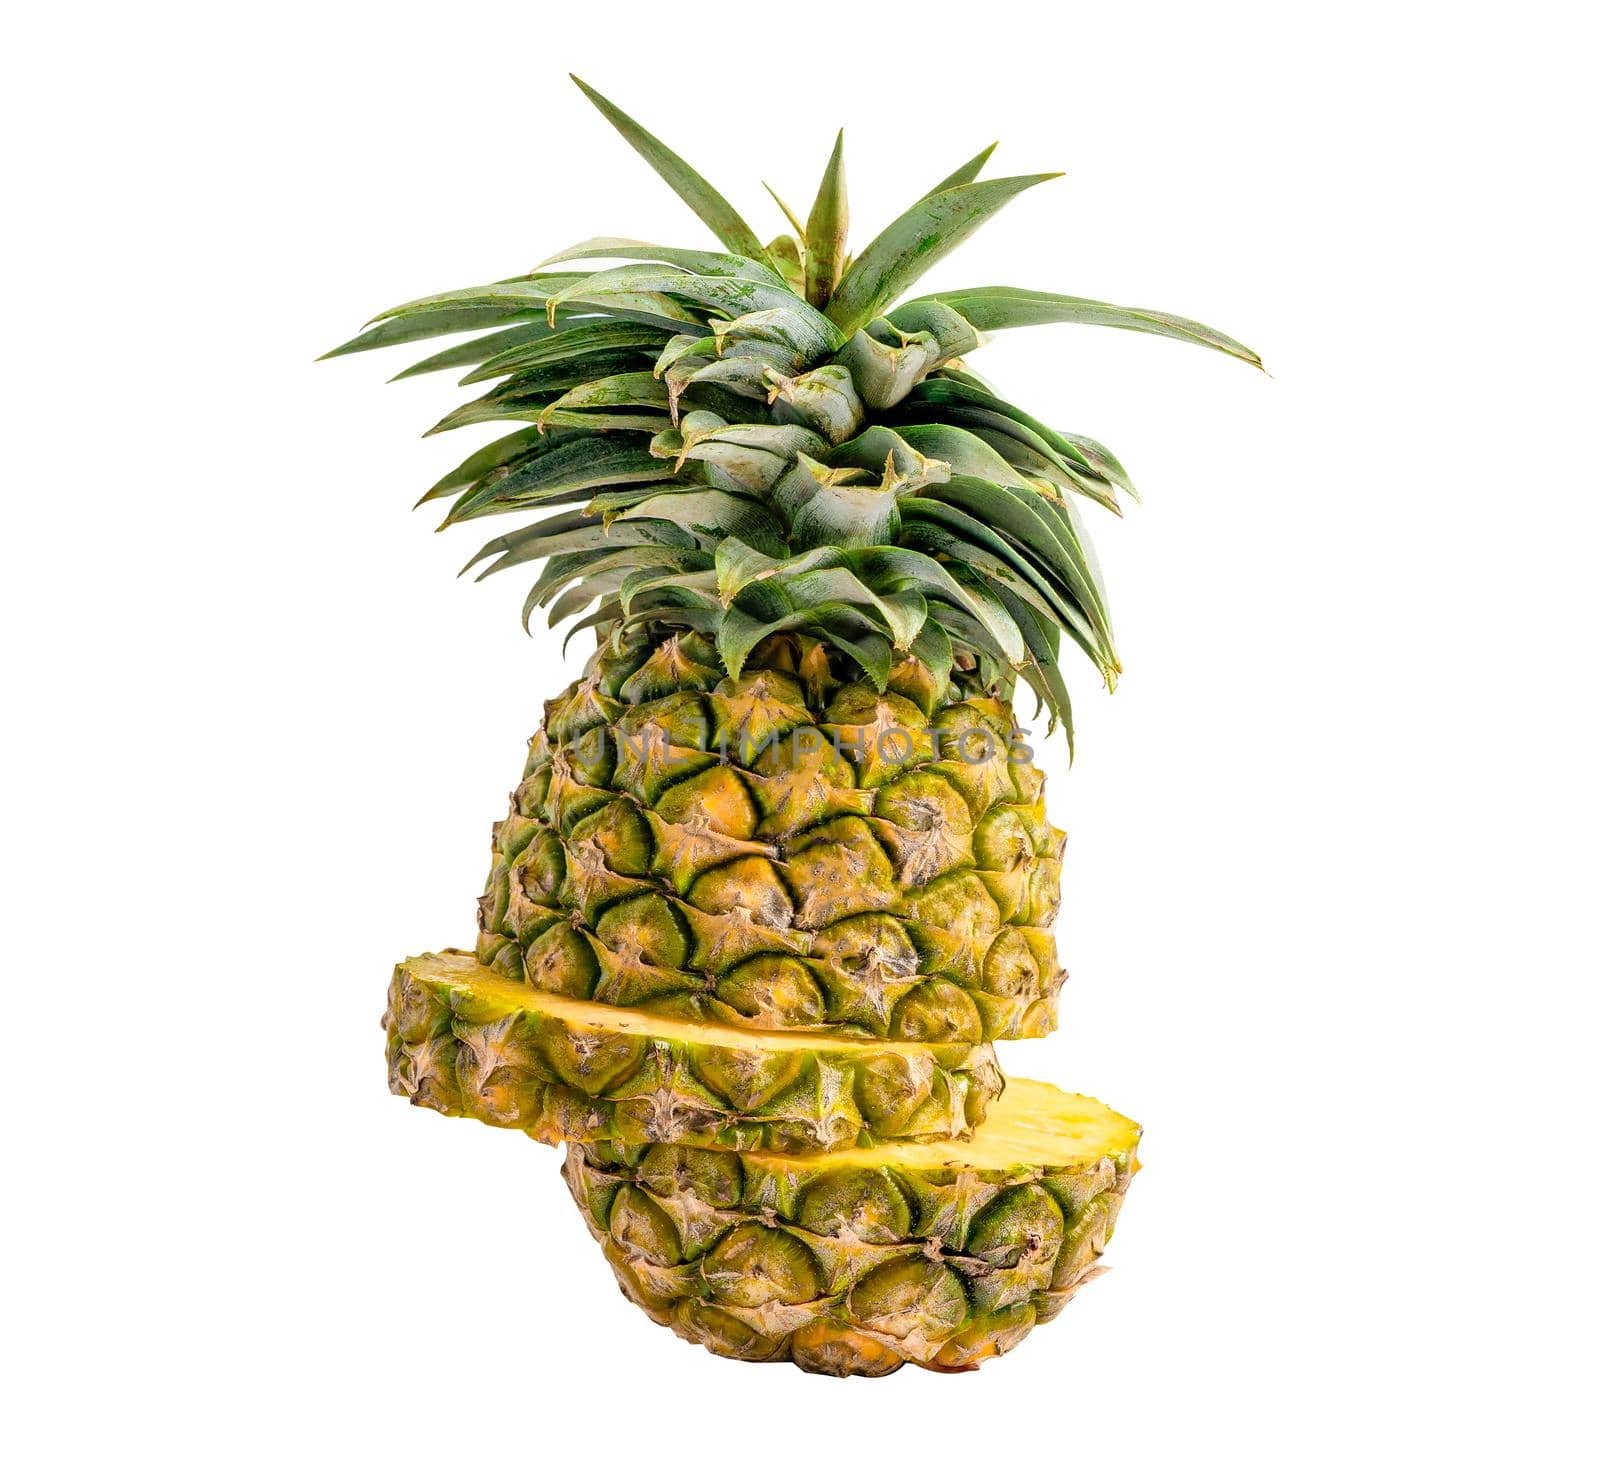 Pineapple fruit with slice isolated on white background with clipping path.